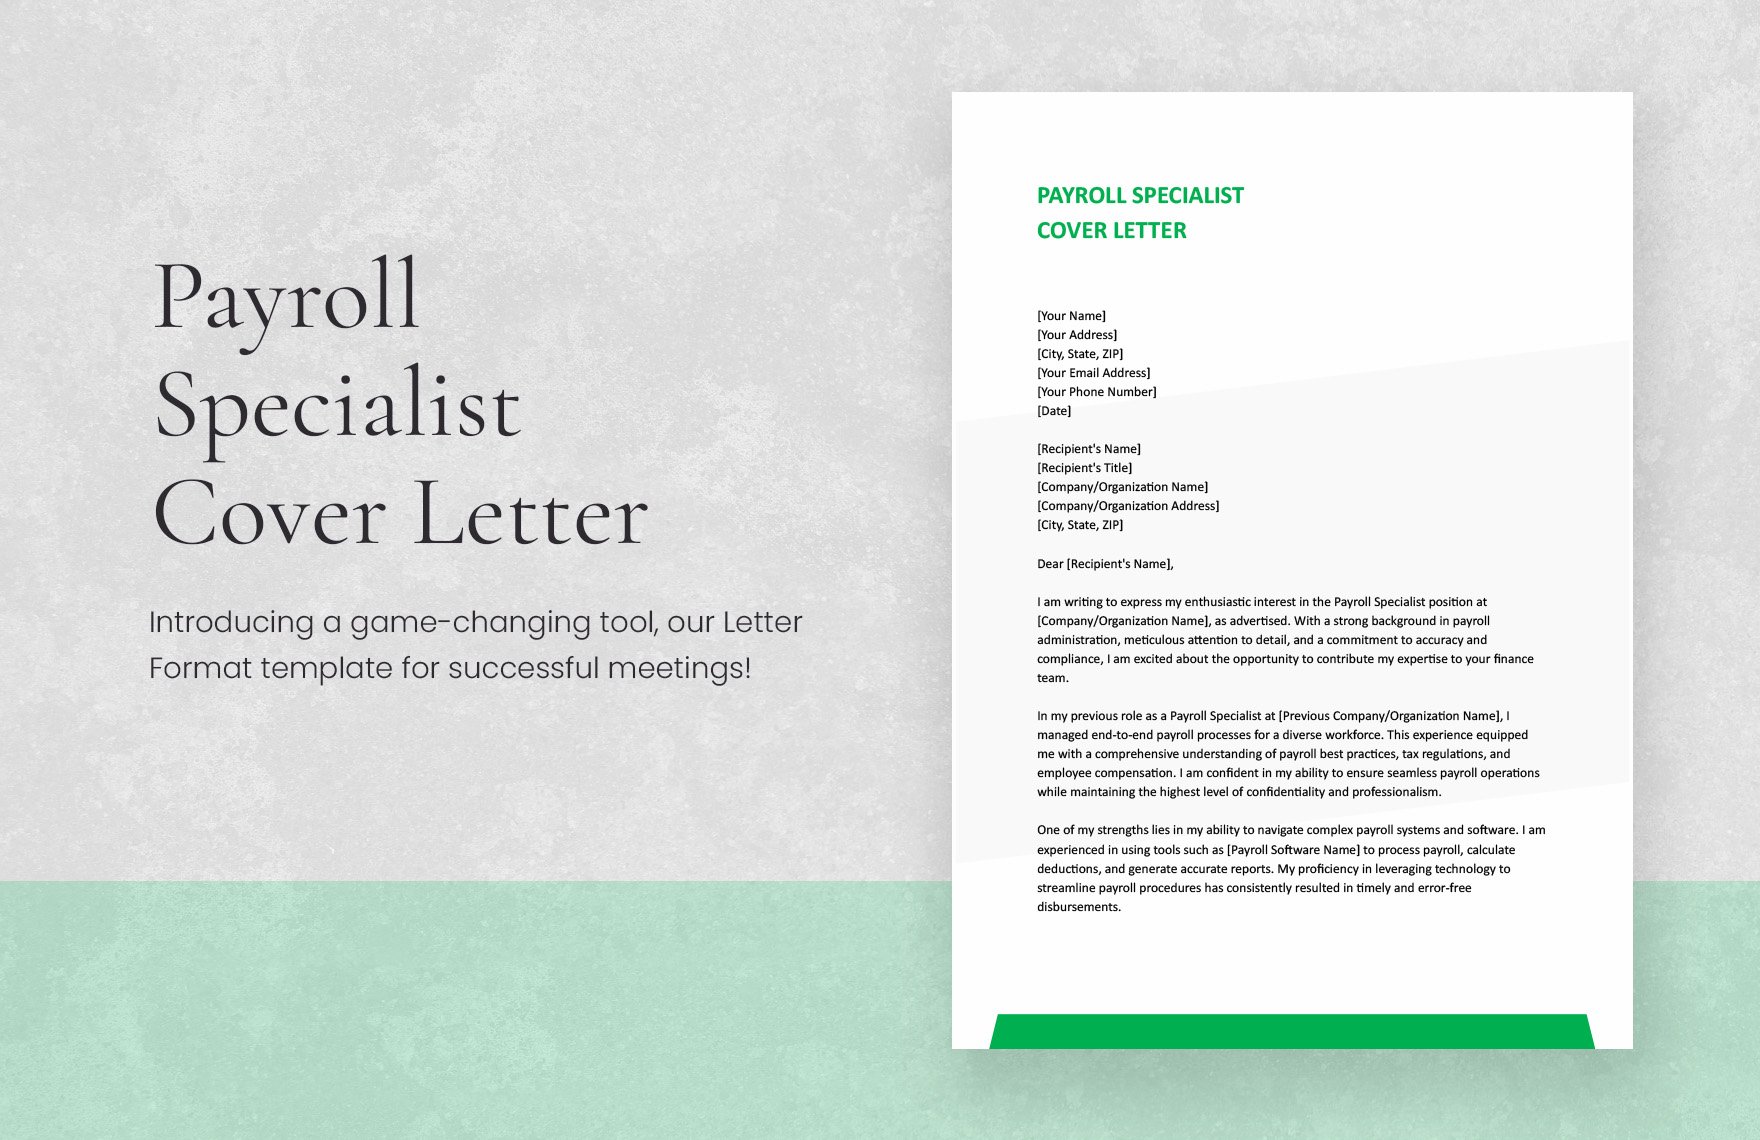 Payroll Specialist Cover Letter in Word, Google Docs, Apple Pages